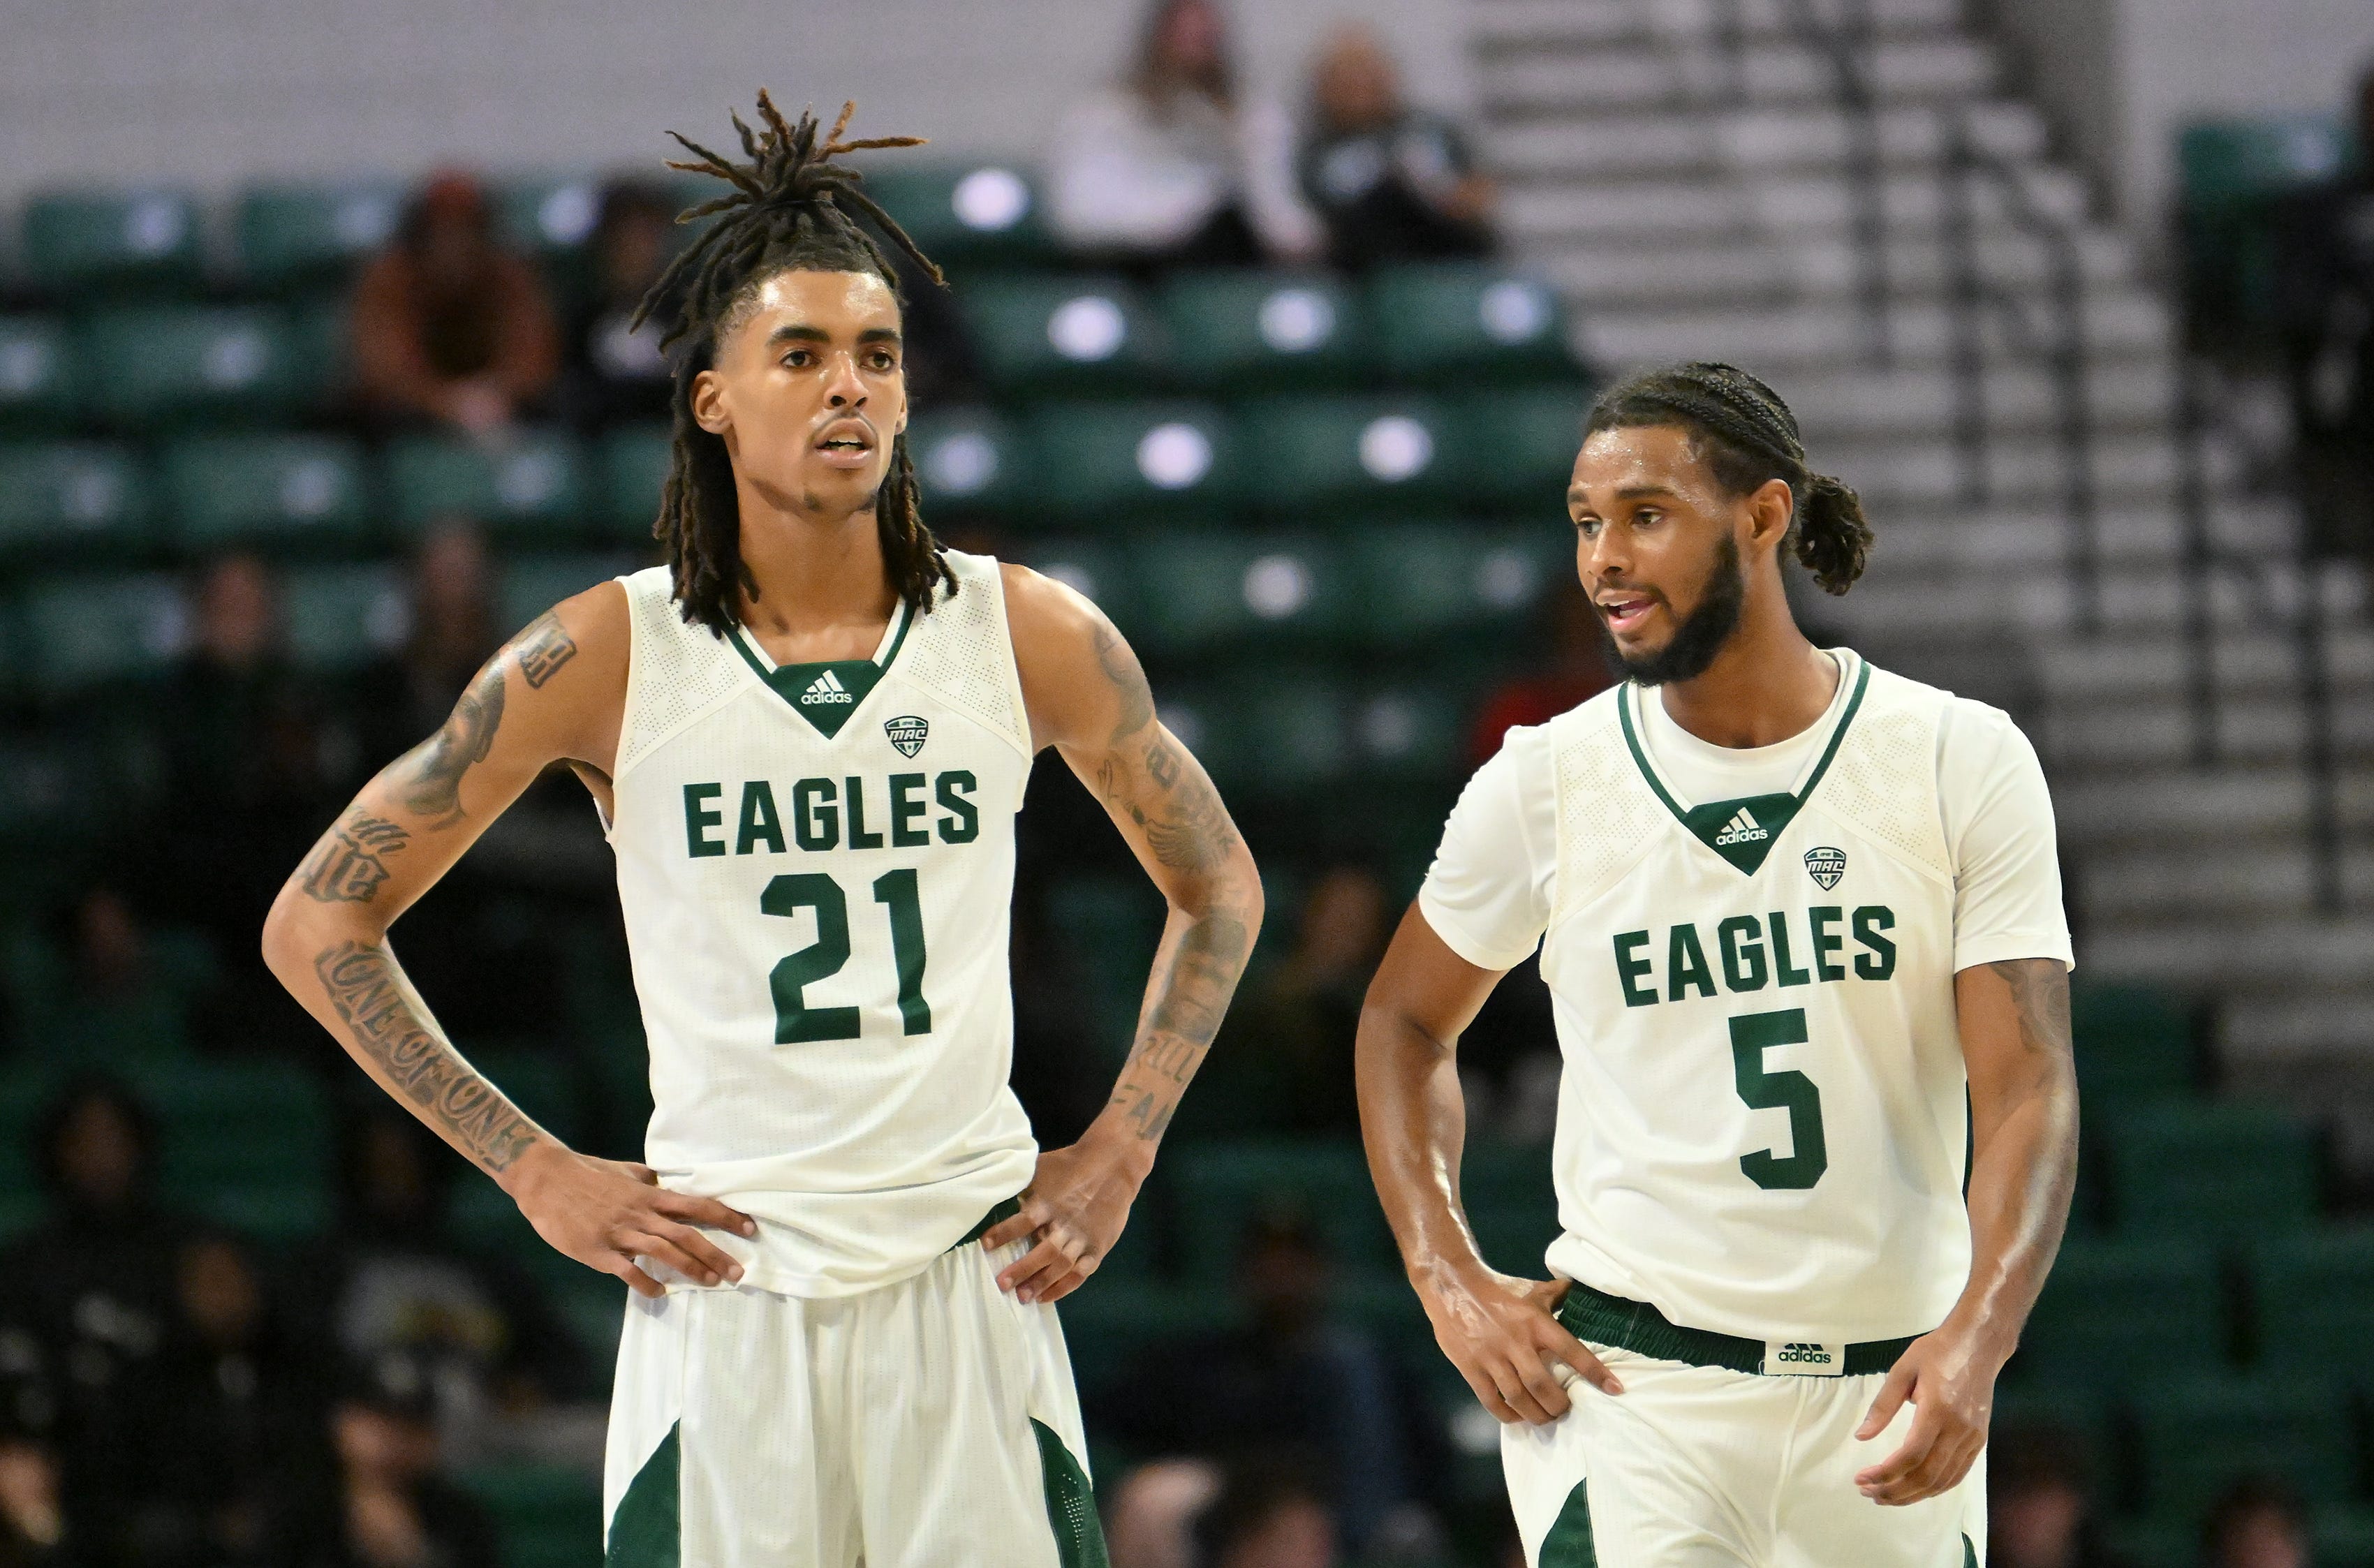 Eastern guard Emoni Bates (21) and Tyson Acuff (5) in the first half.  Eastern vs Grand Valley in men's basketball exhibition at George Gervin GameAbove Center at Eastern Michigan University in Ypsilanti, Mich. on Oct. 27, 2022.